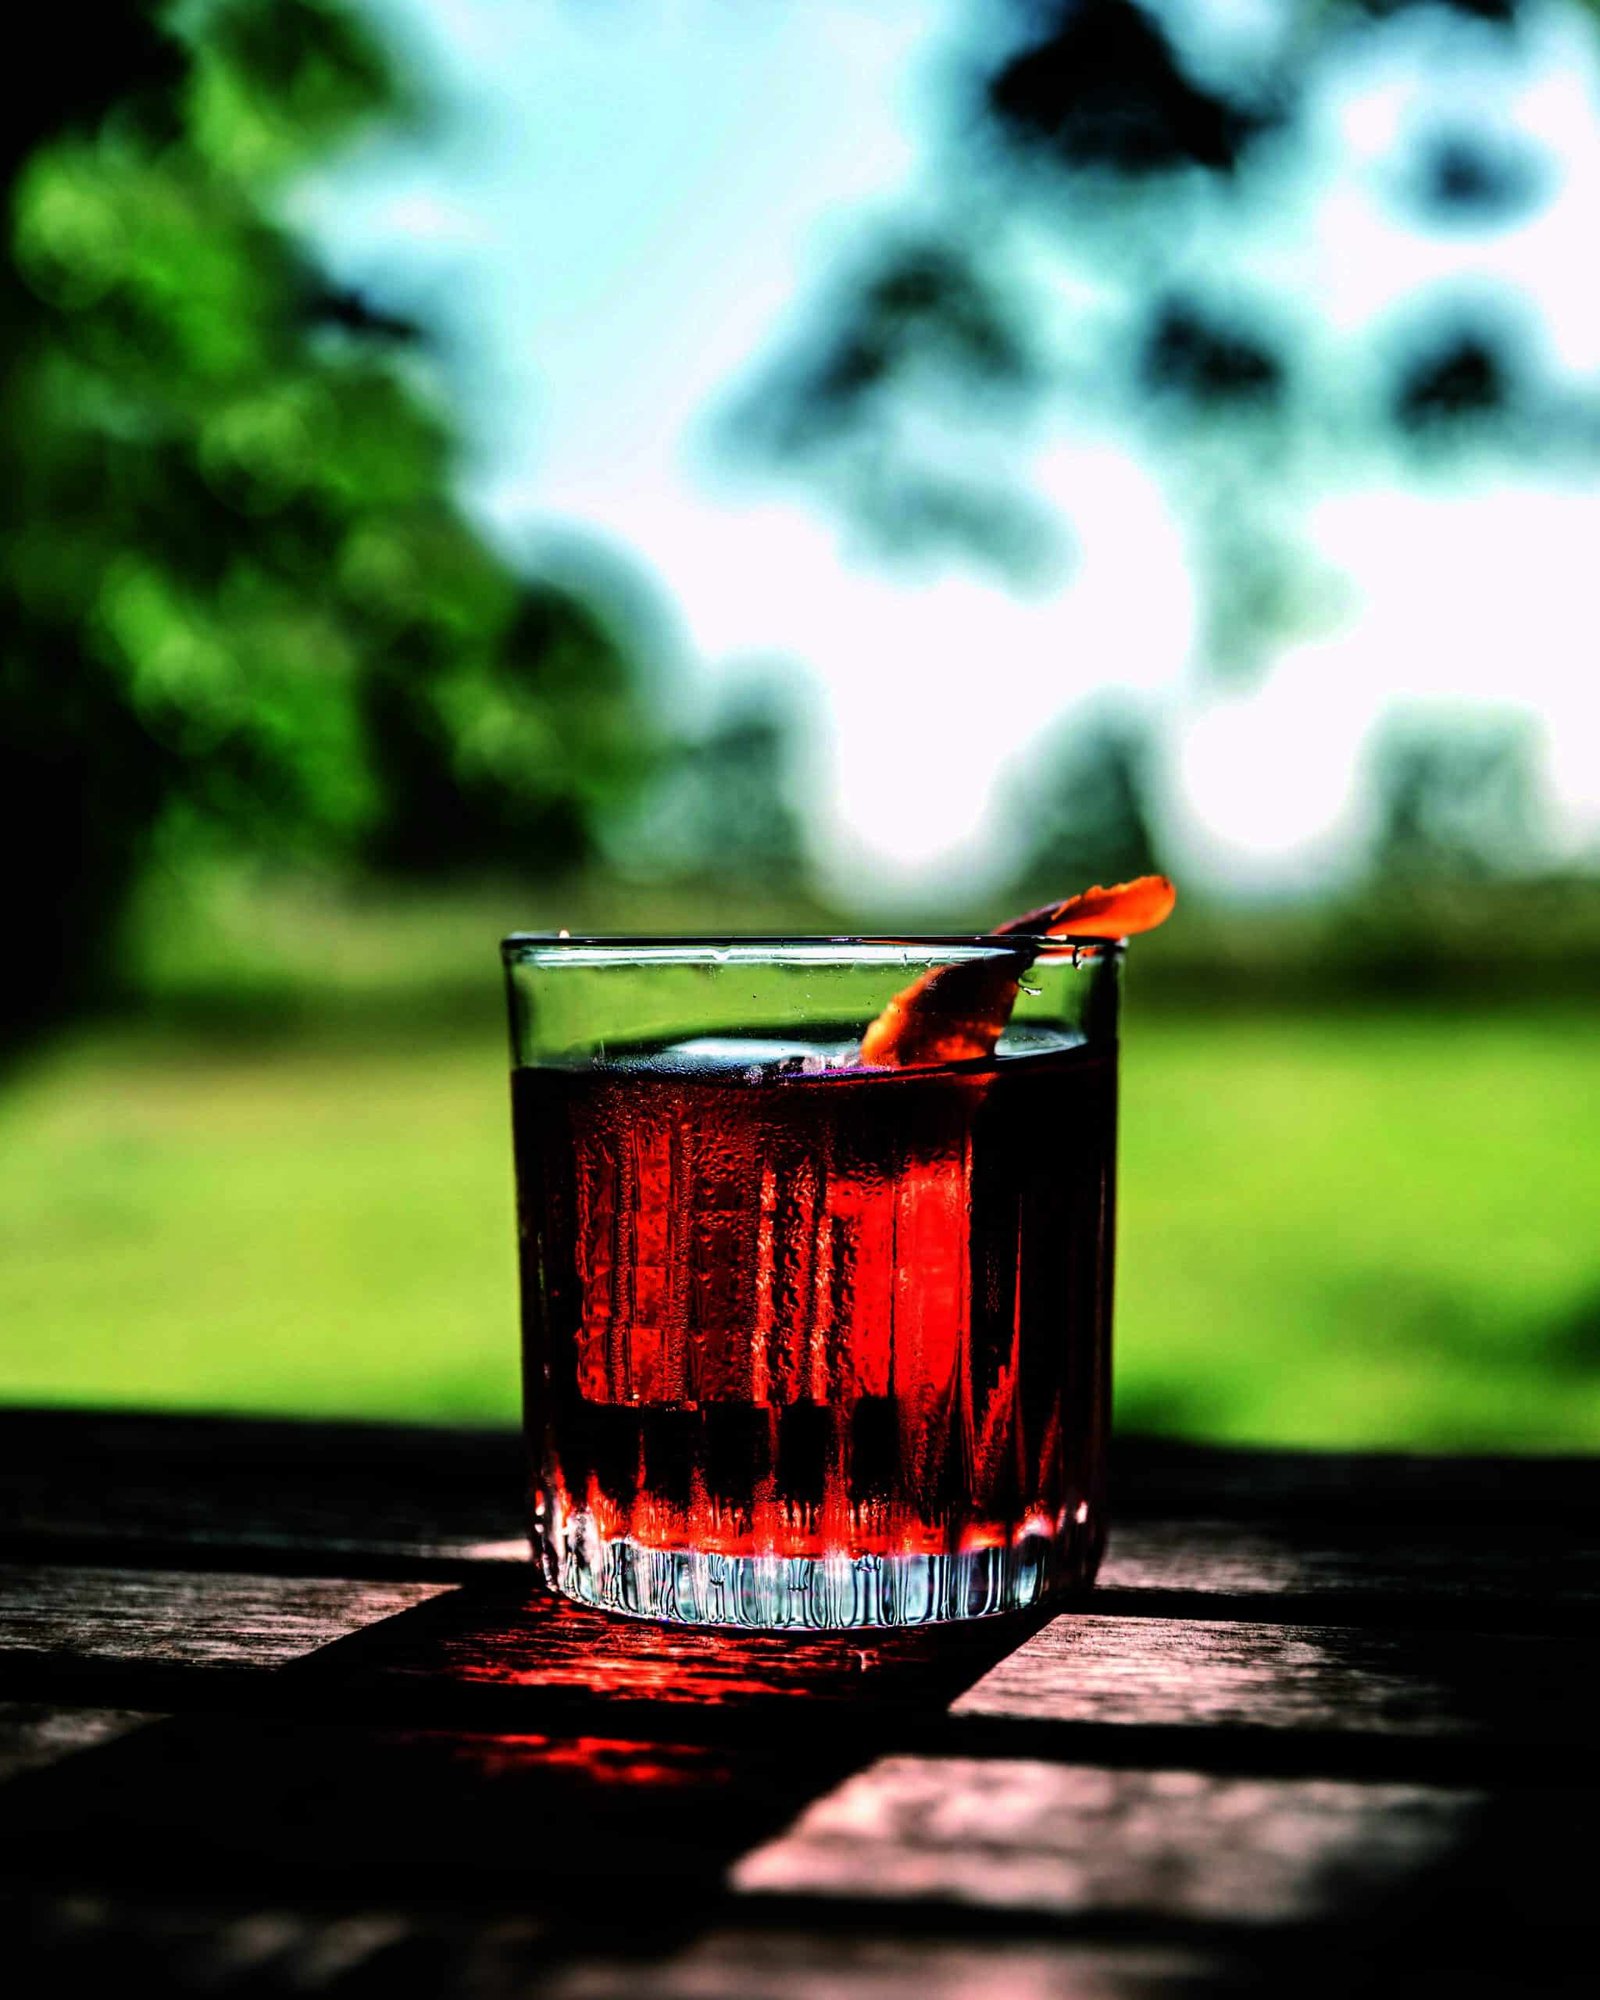 A glass of red liquid sitting on a wooden table, connecting nature.